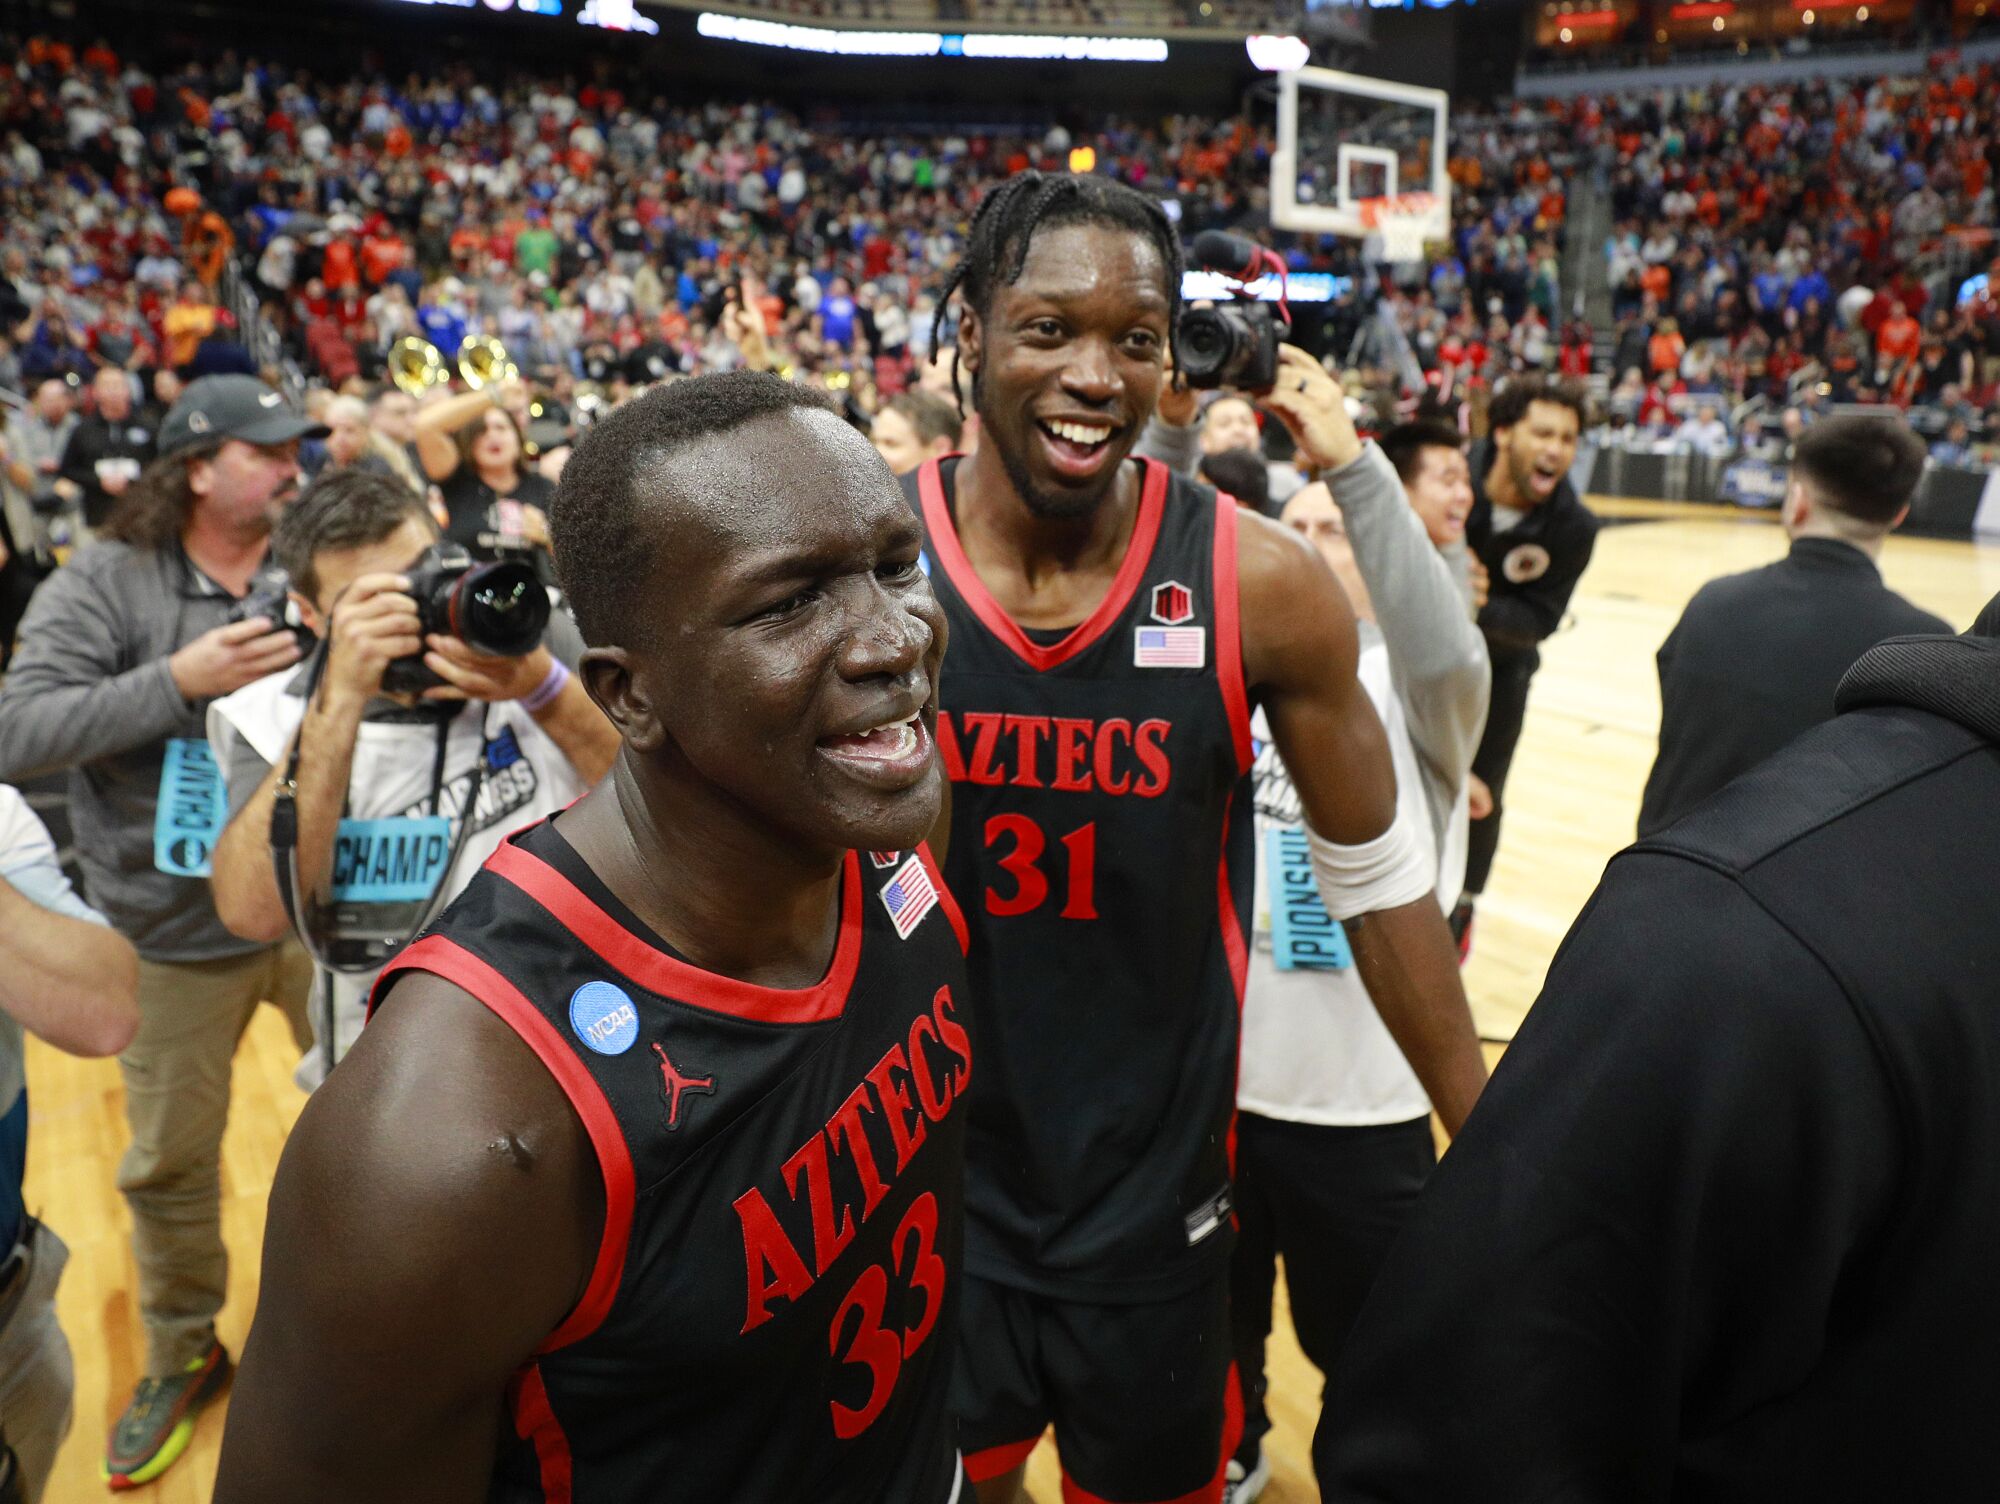 San Diego State's Aguek Arop and Nathan Mensah celebrate after a win against Alabama in a Sweet 16 game.